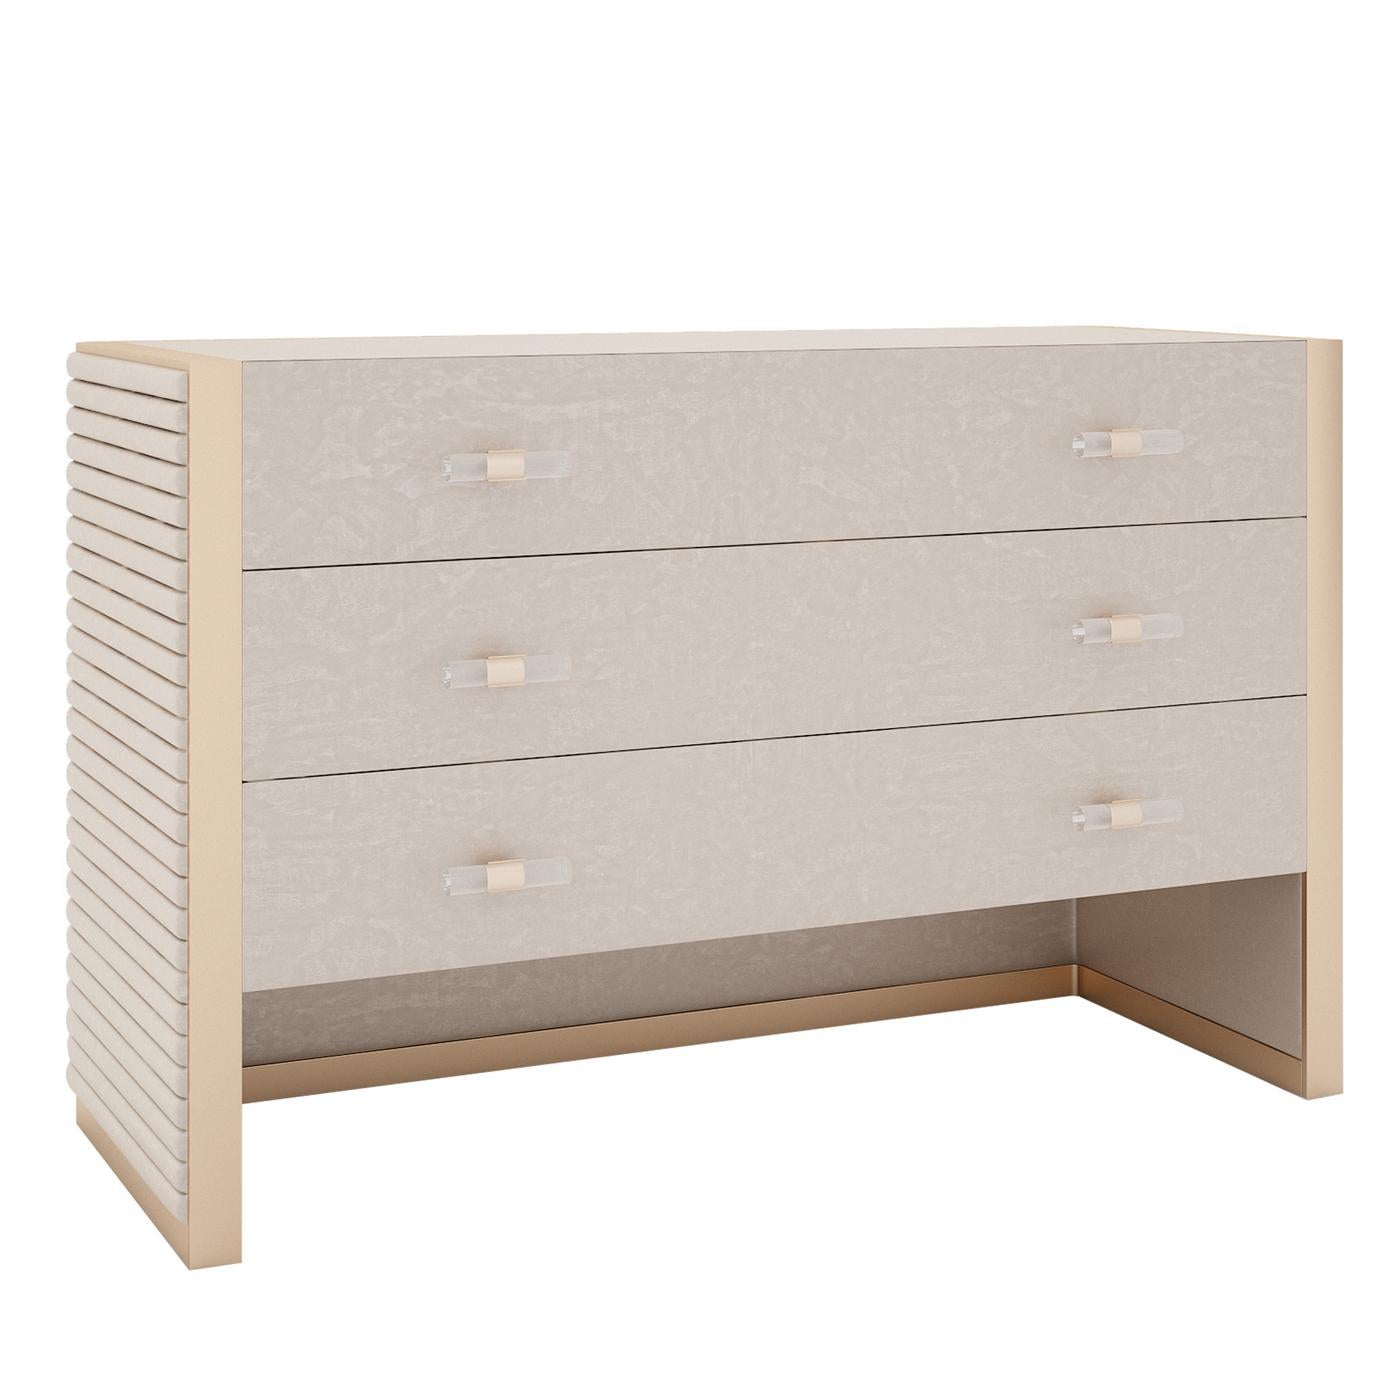 Showcasing a superbly refined and solid silhouette, this dresser is aptly named Majestic. Brass-finished metal inserts outline its main lines, including the three drawers' handles, and splendidly complement the upholstery in light gray fabric